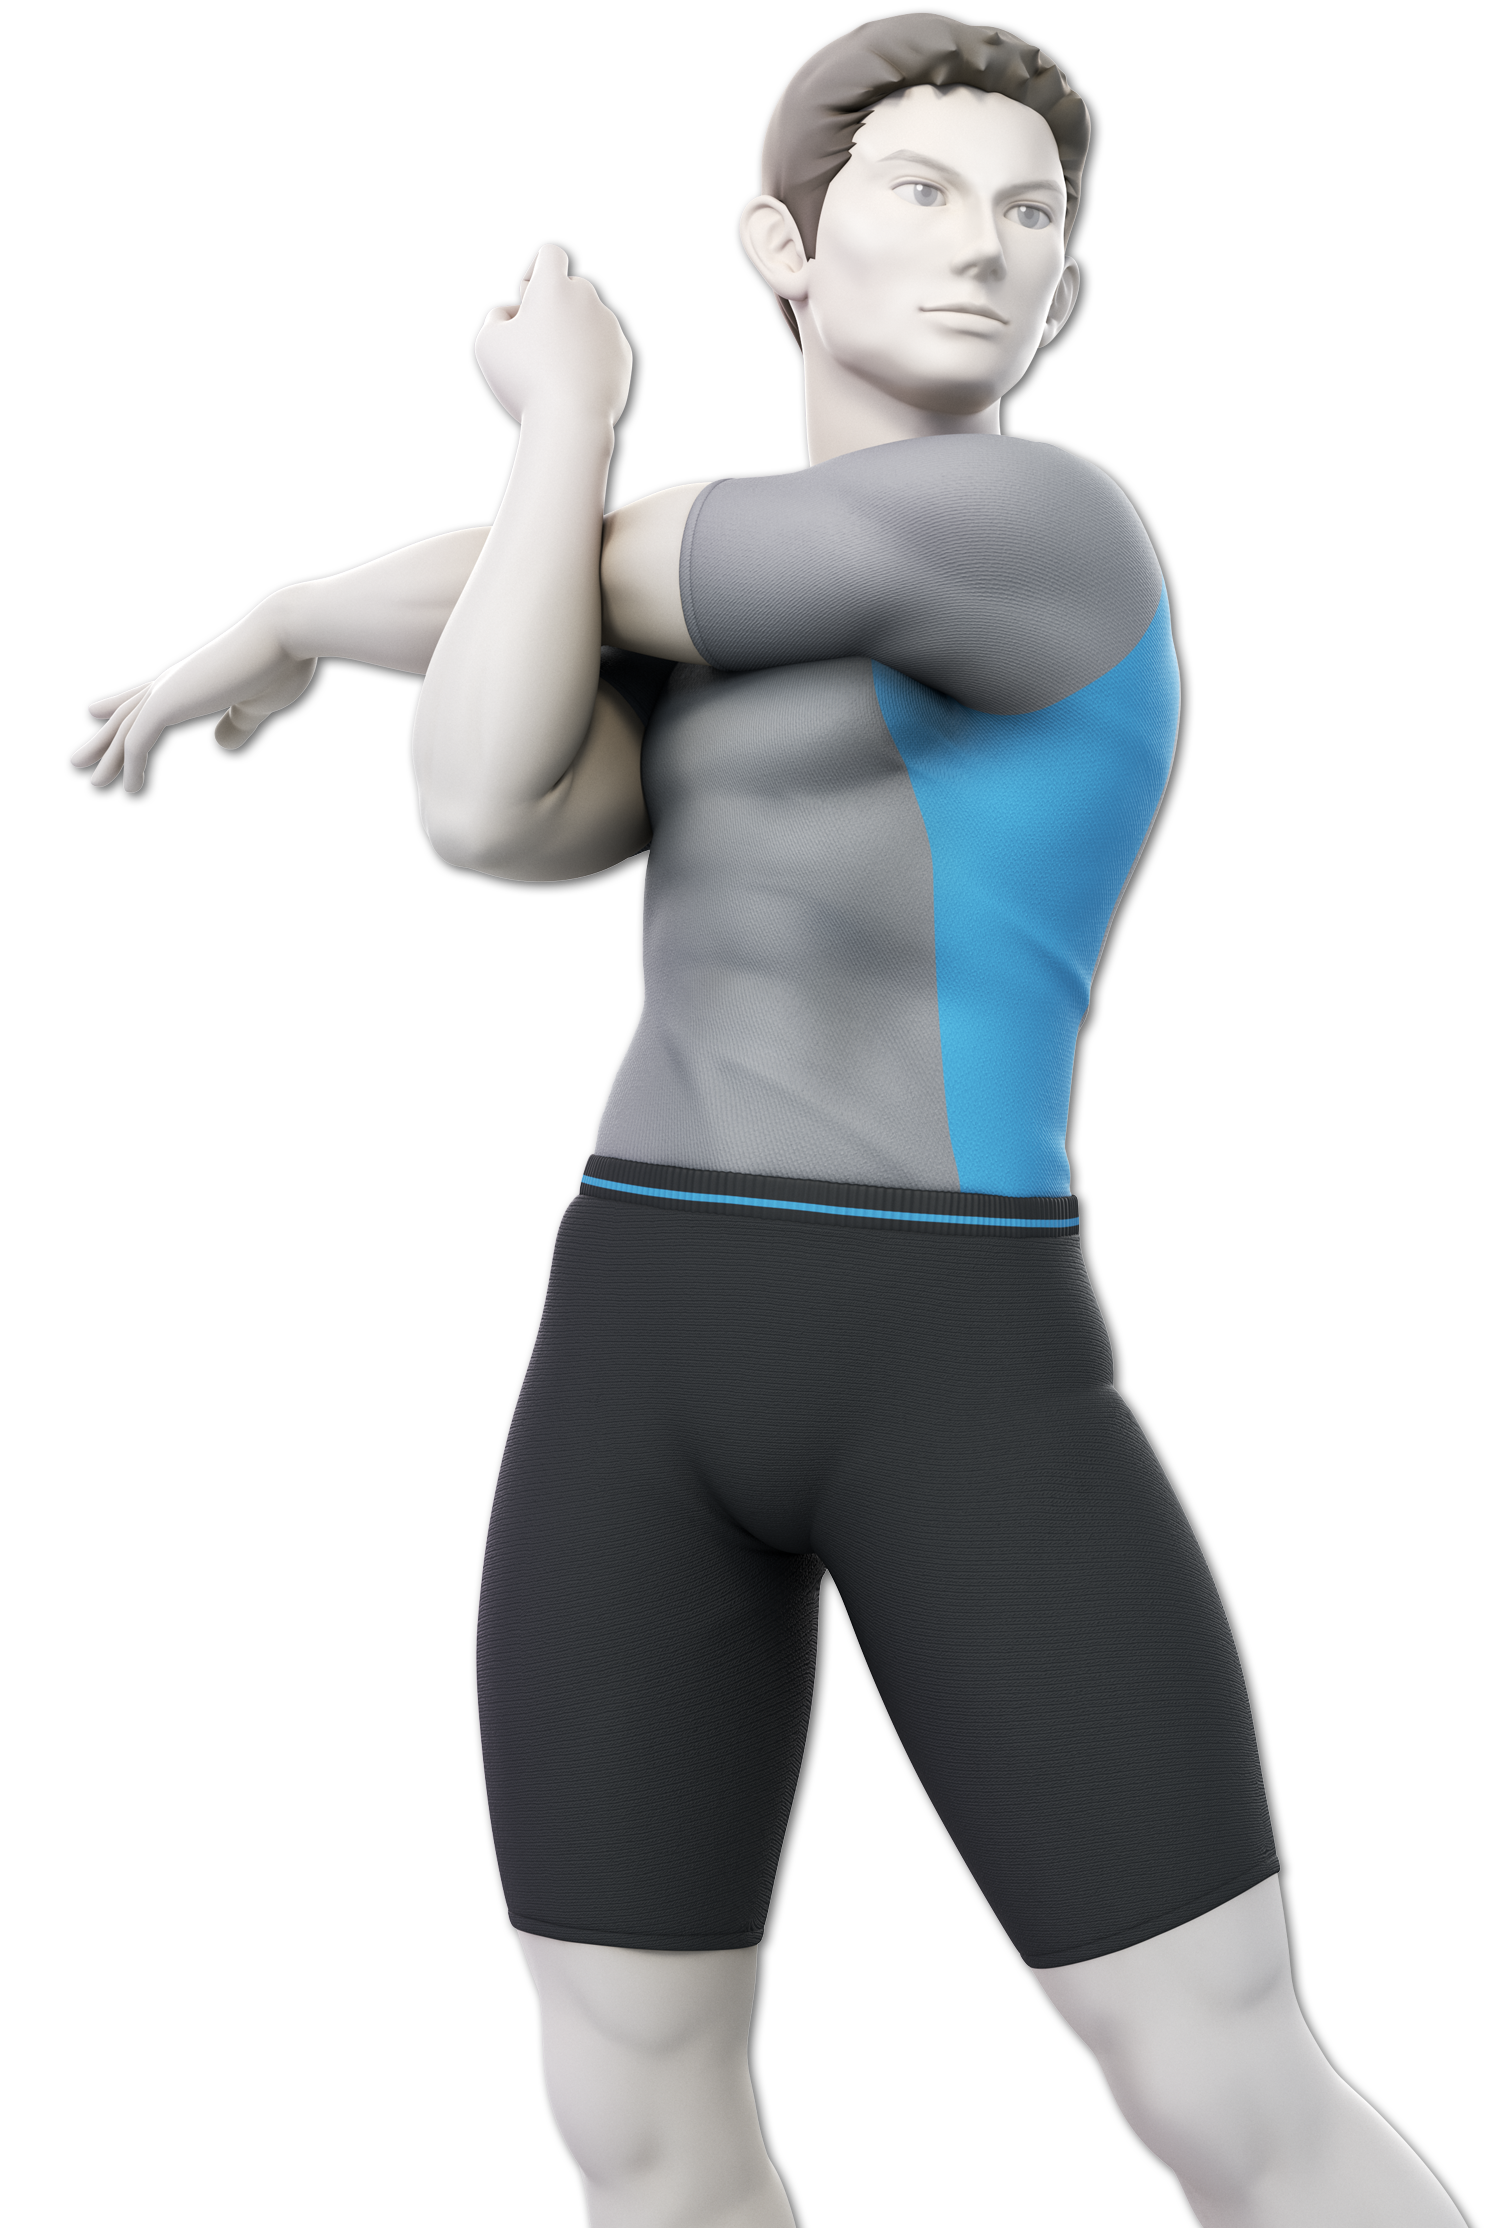 wii fit smash